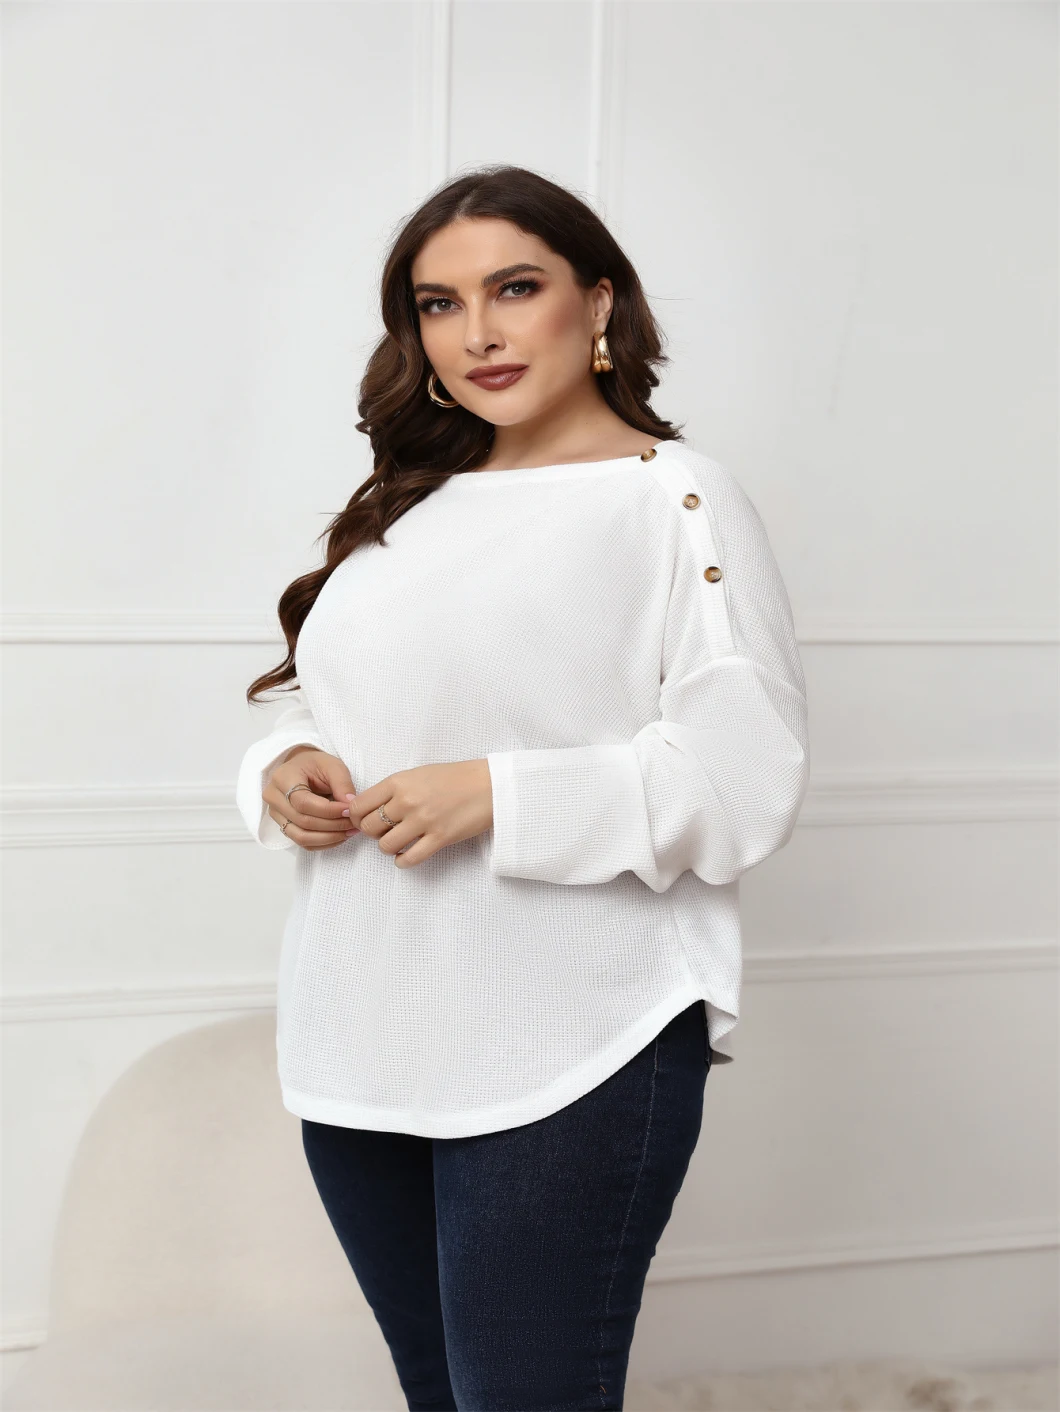 Long Sleeve Tops for Women Womens Clothing Top Quality